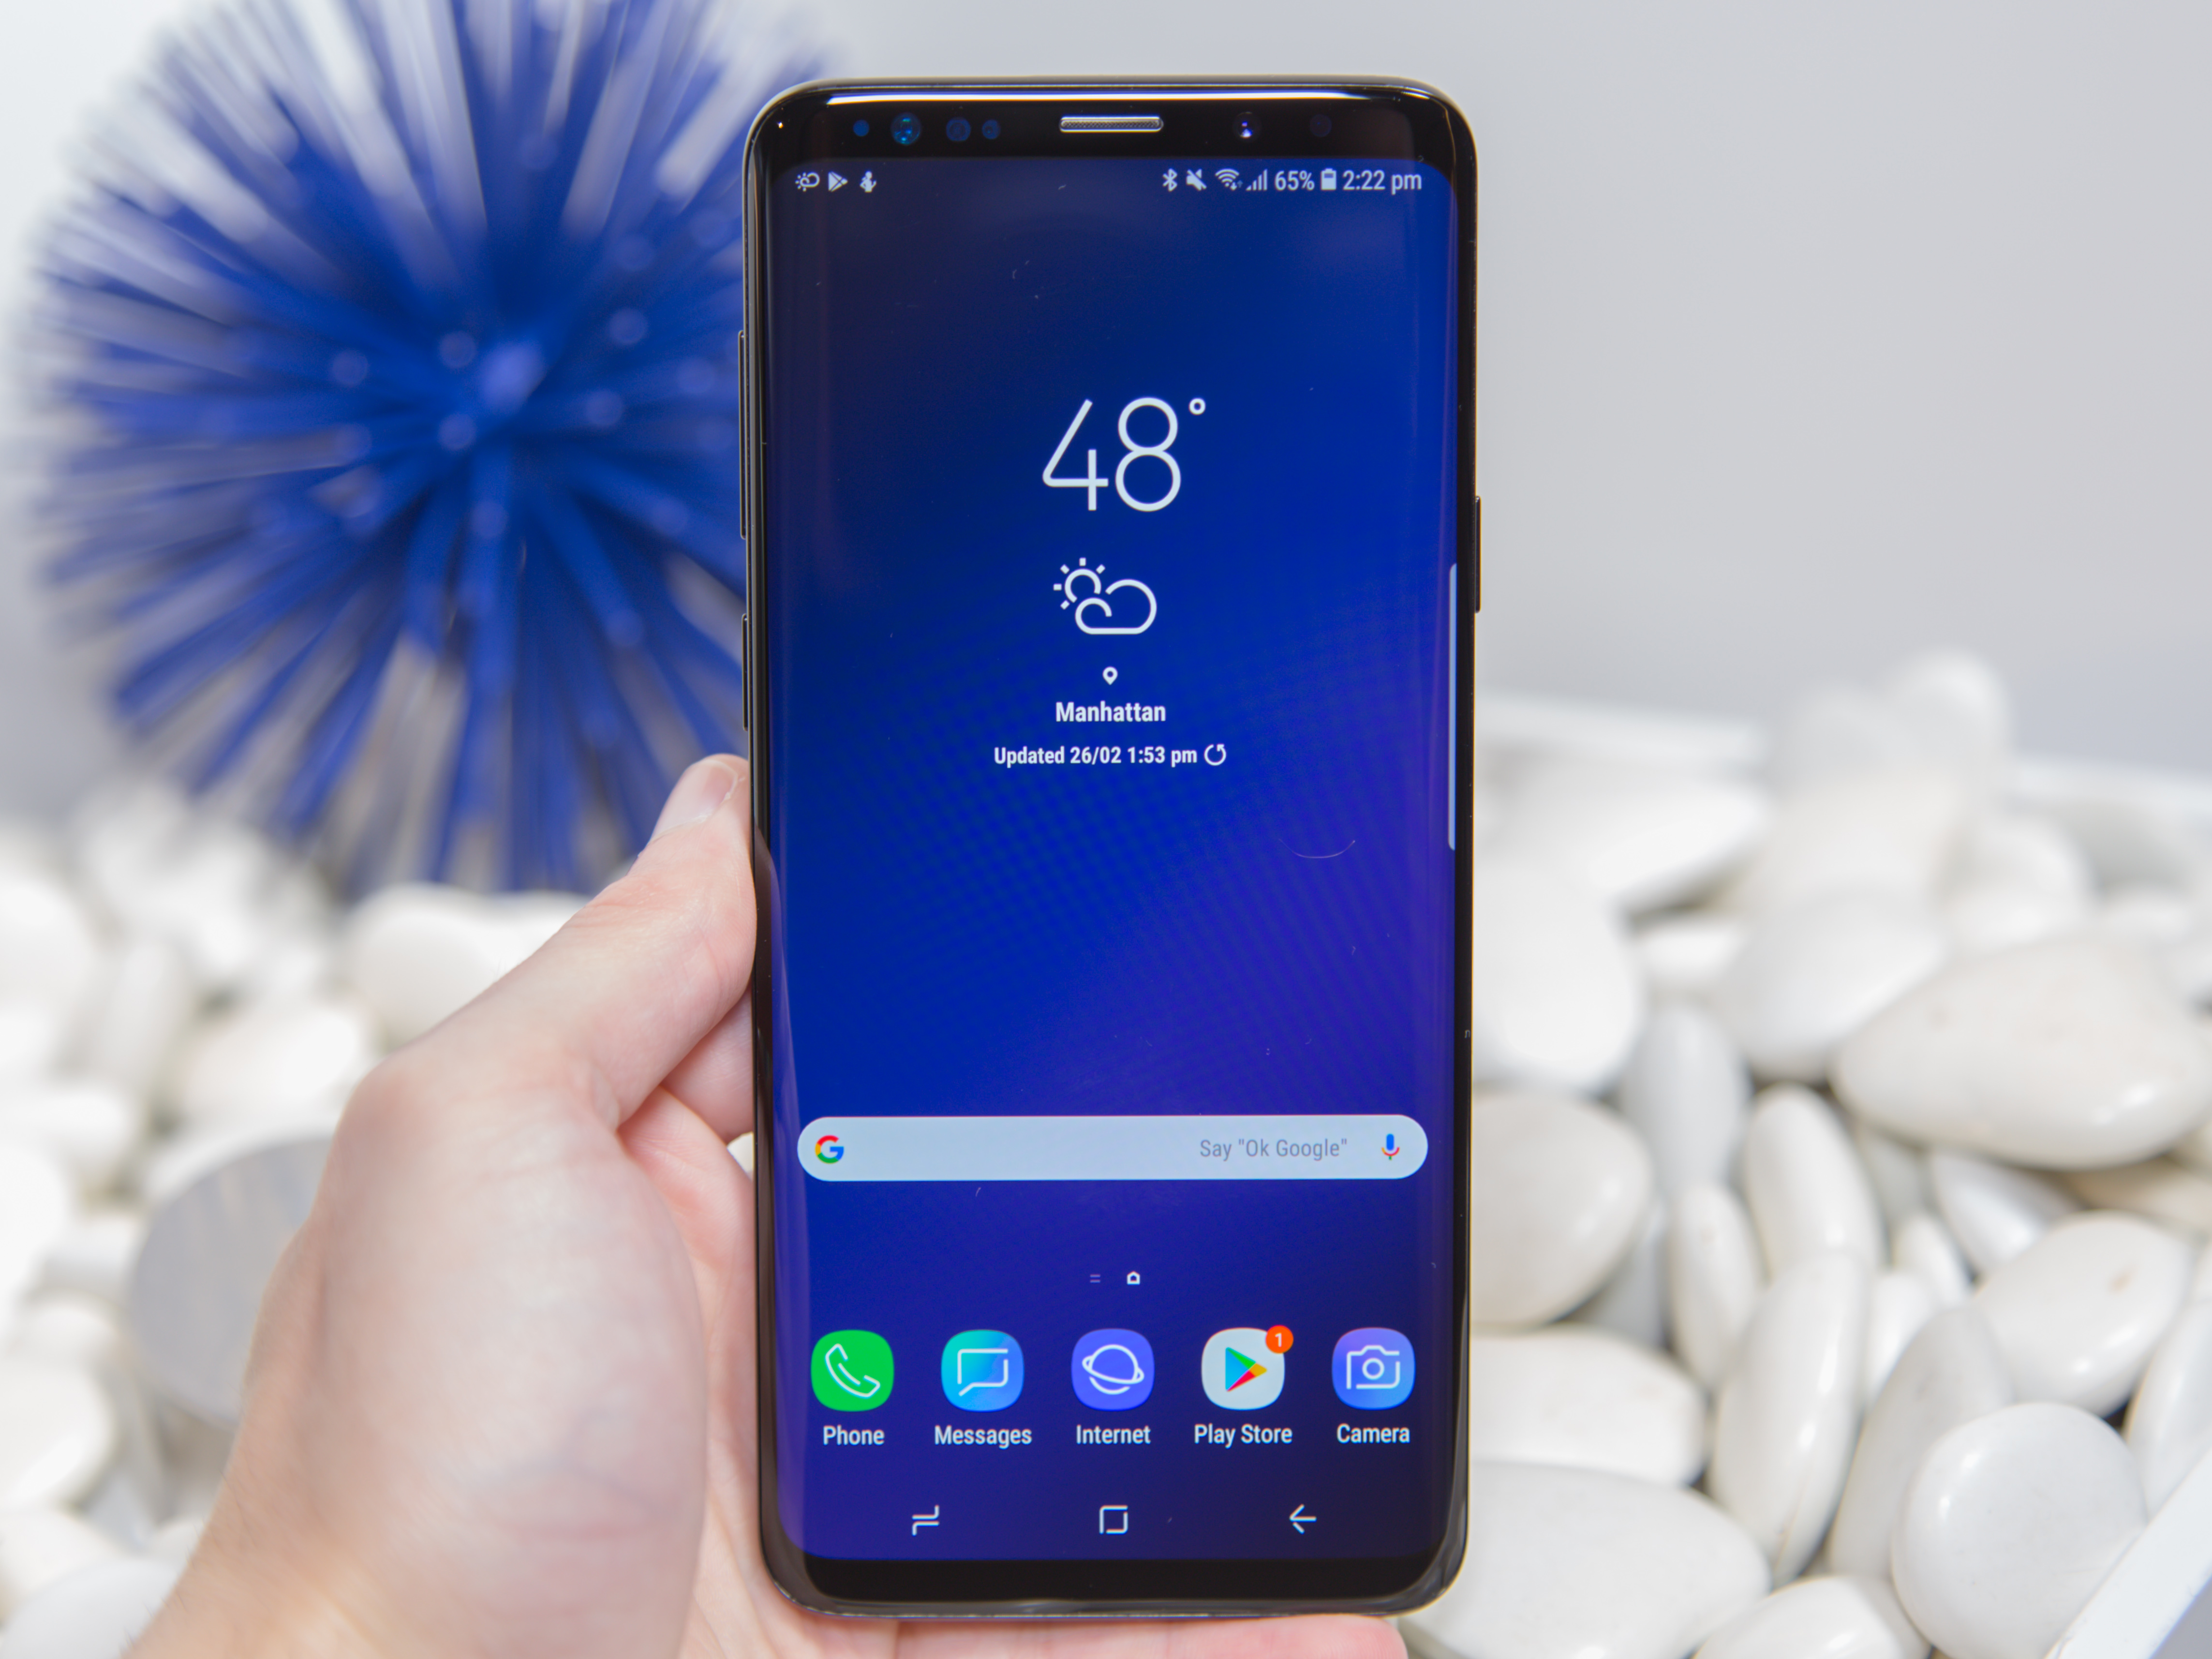 Samsung Galaxy S9 review: Very nearly brilliant, with a new lower